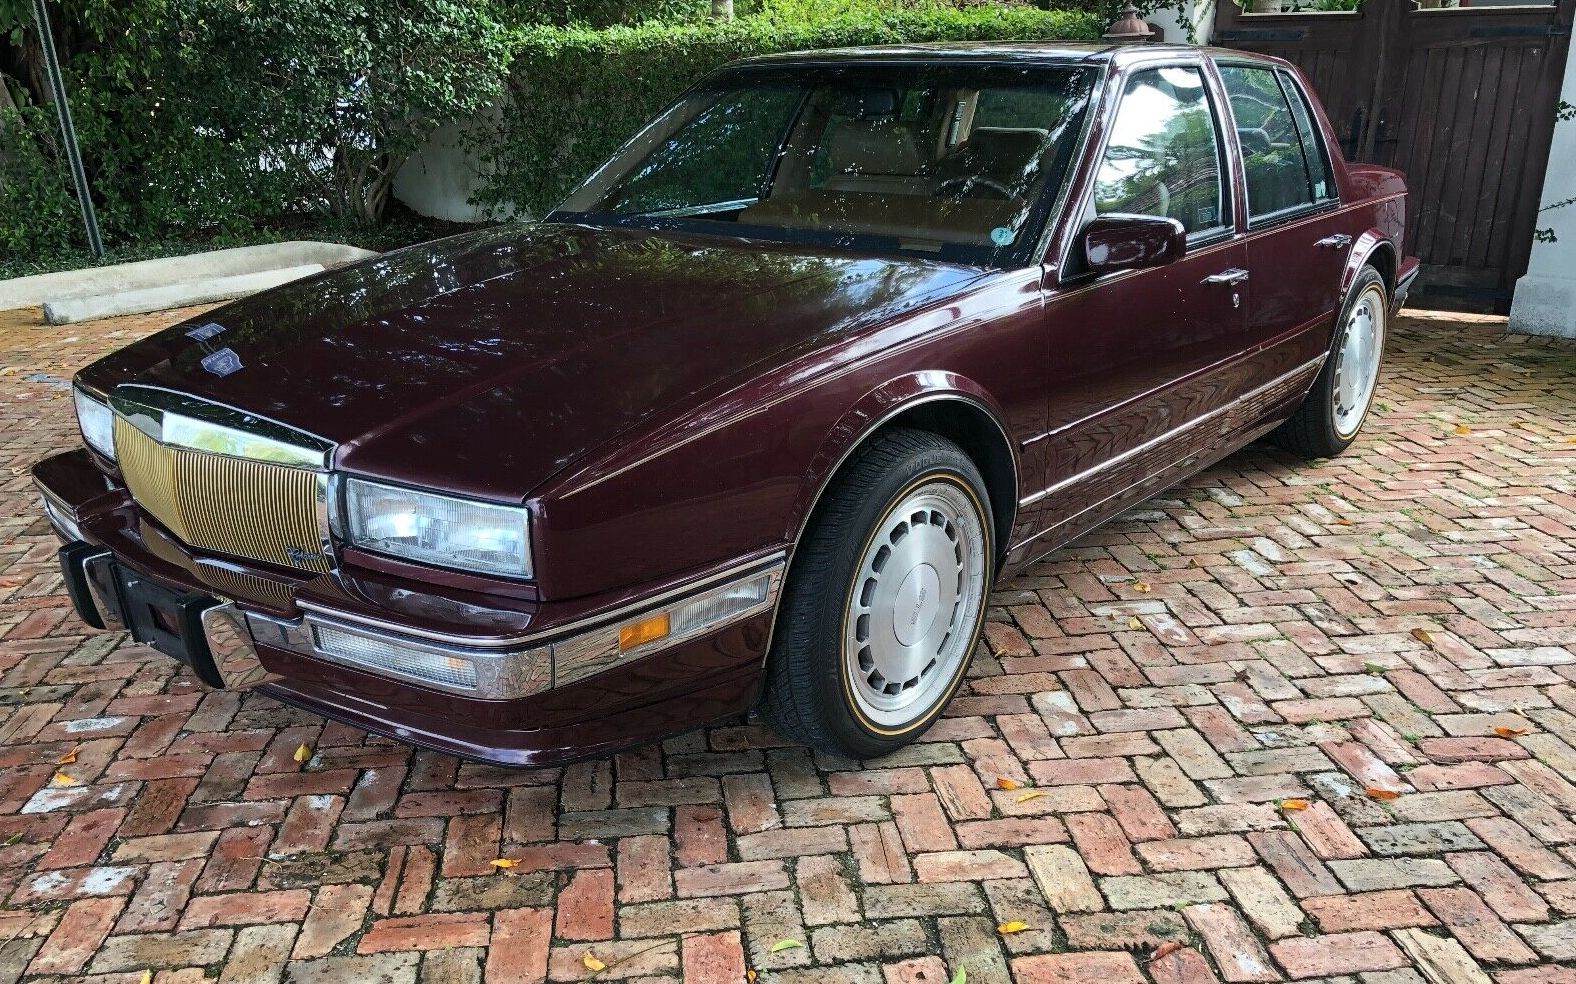  Cadillac Seville "Sts" Luxury Touring SEDAN- The Most